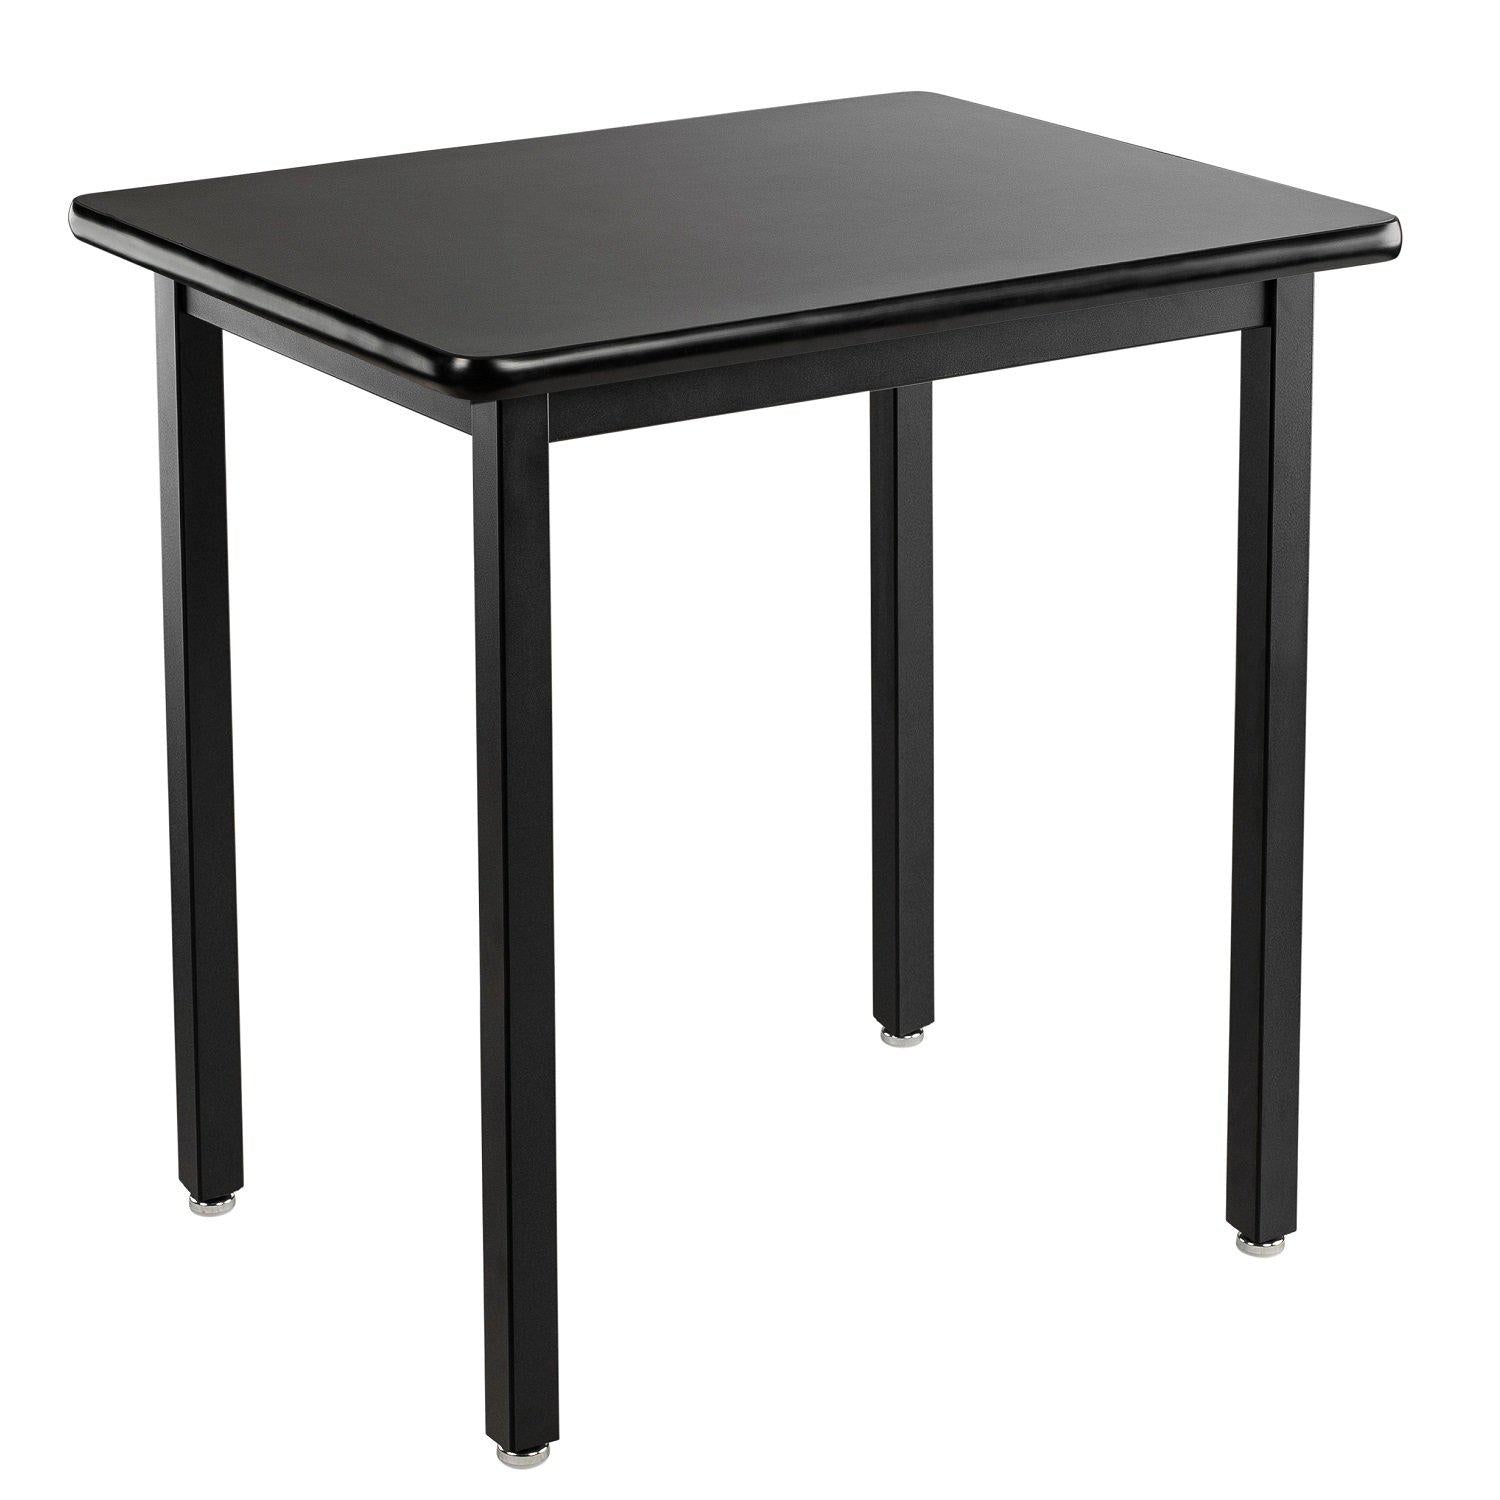 Heavy-Duty Fixed Height Utility Table, Black Frame, 30" x 30", High-Pressure Laminate Top with T-Mold Edge